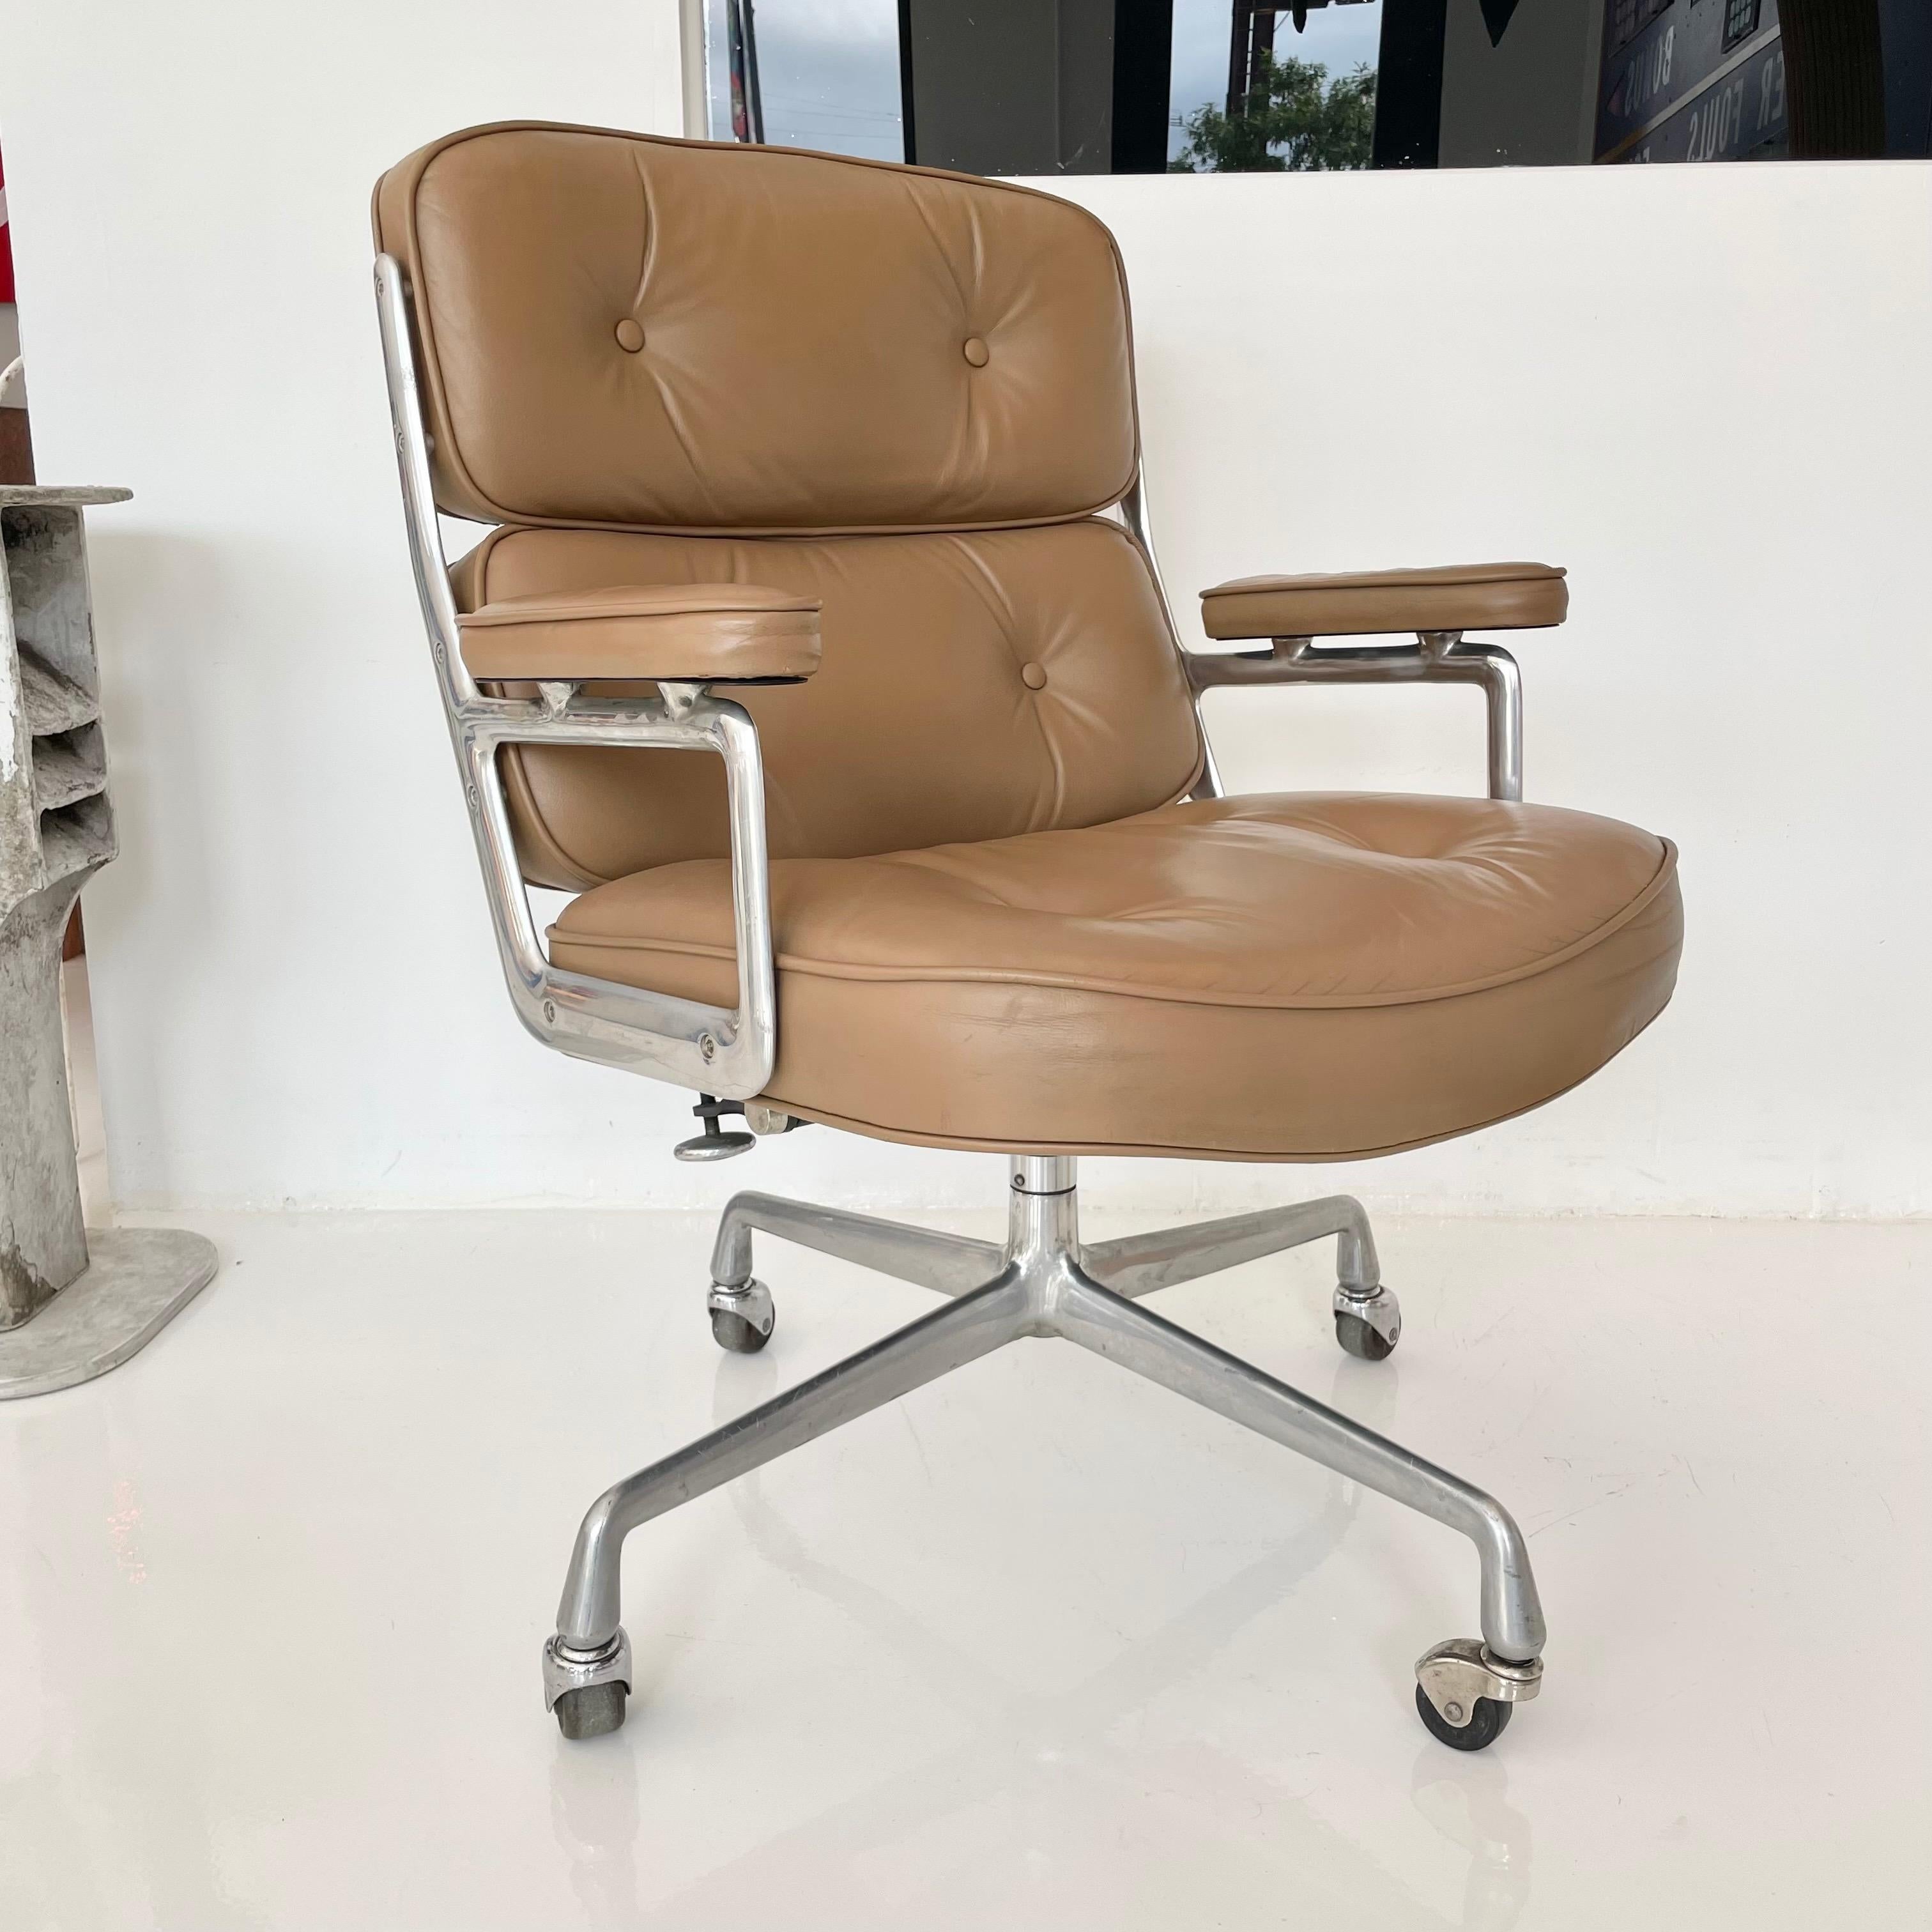 Classic Eames Time Life swivel chair in camel leather for Herman Miller. Swivels, reclines, and is height adjustable. Unusual color. Metal and leather are in good vintage condition with wear as shown. Offered with original casters. The perfect